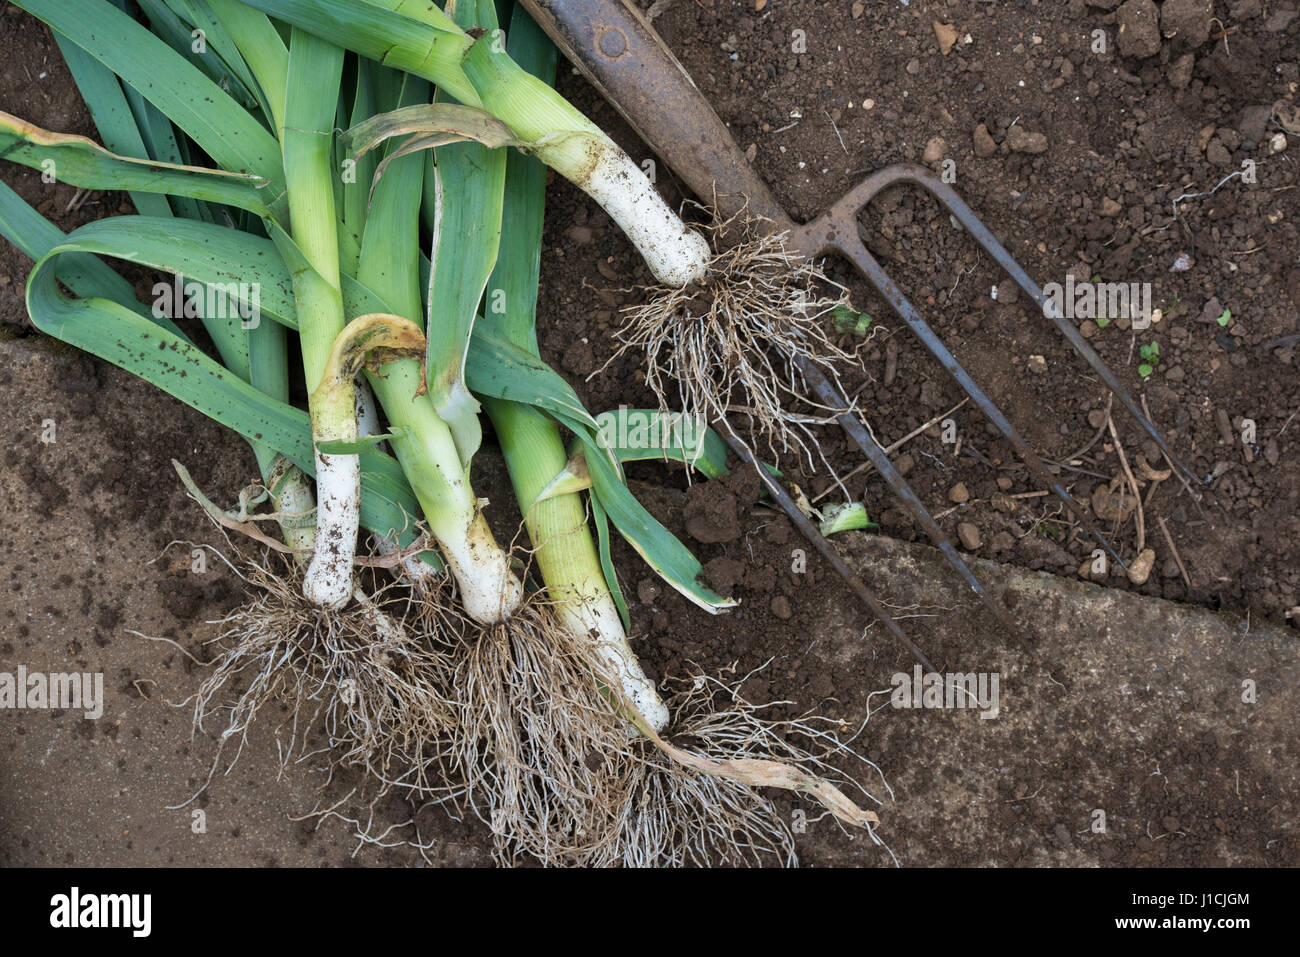 Dug up overwintered leeks with a garden fork in a vegetable garden. UK Stock Photo